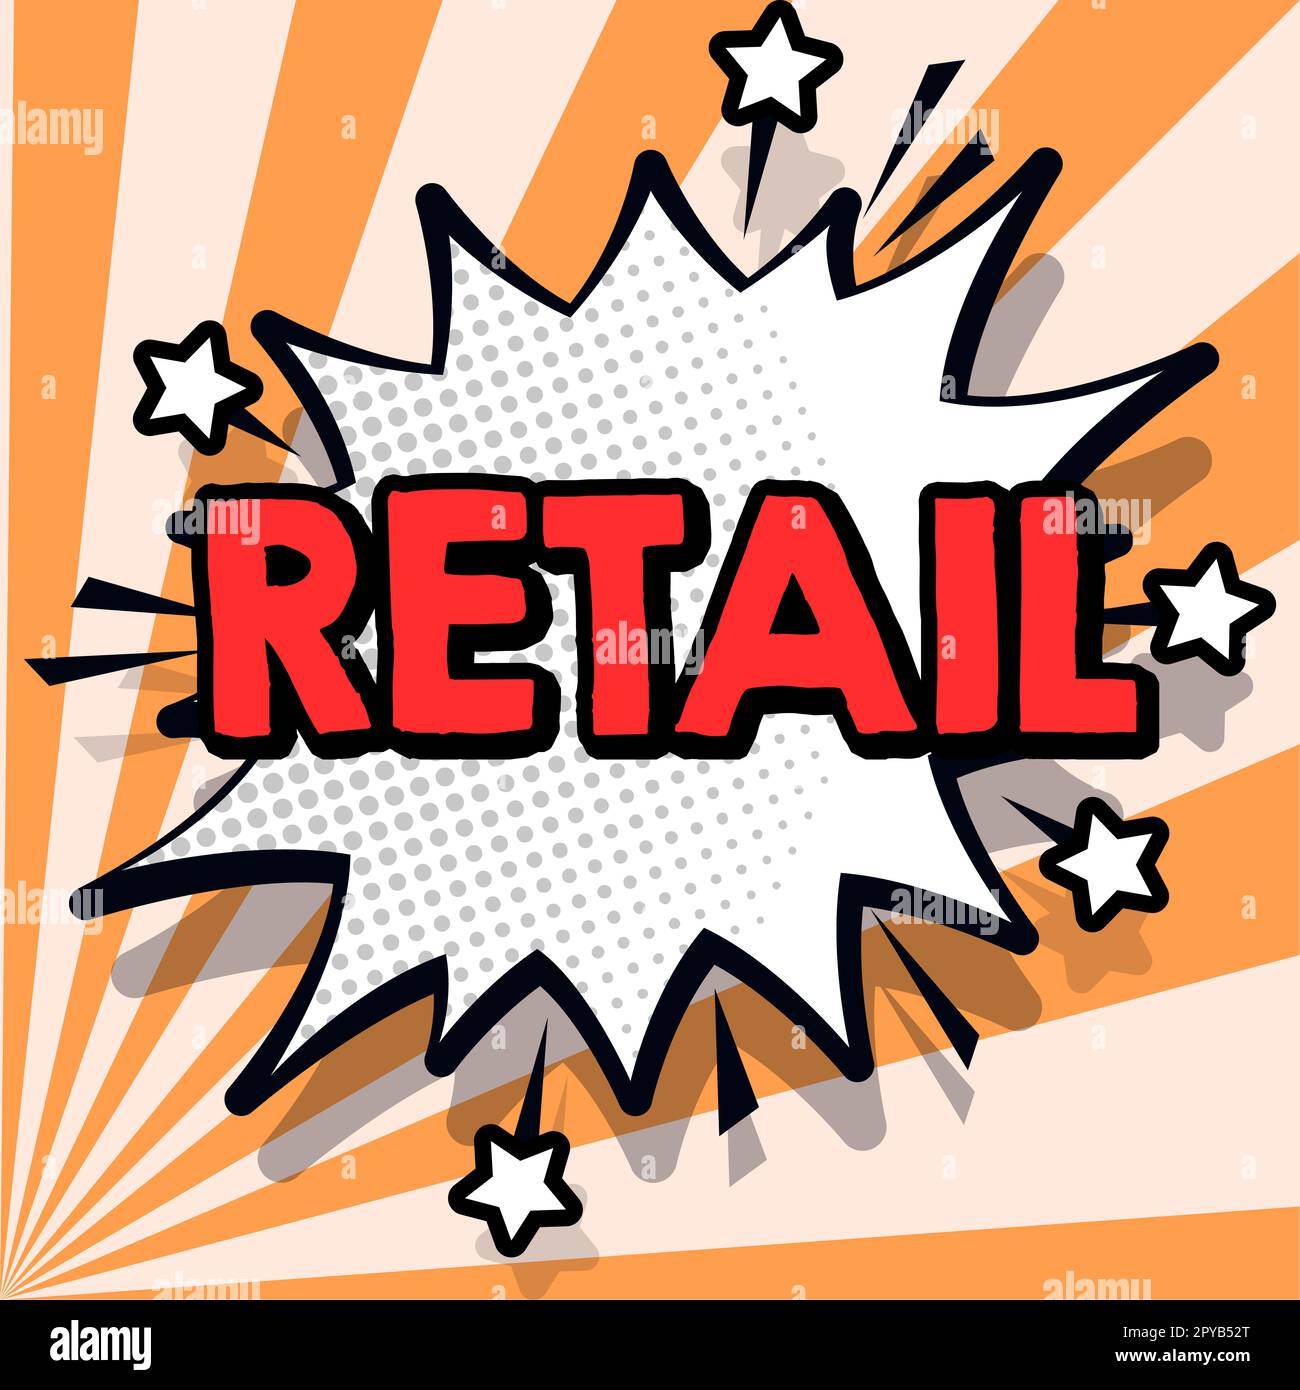 Sign displaying Retail. Concept meaning Sale of goods to public in relatively small quantities Sales strategy Stock Photo